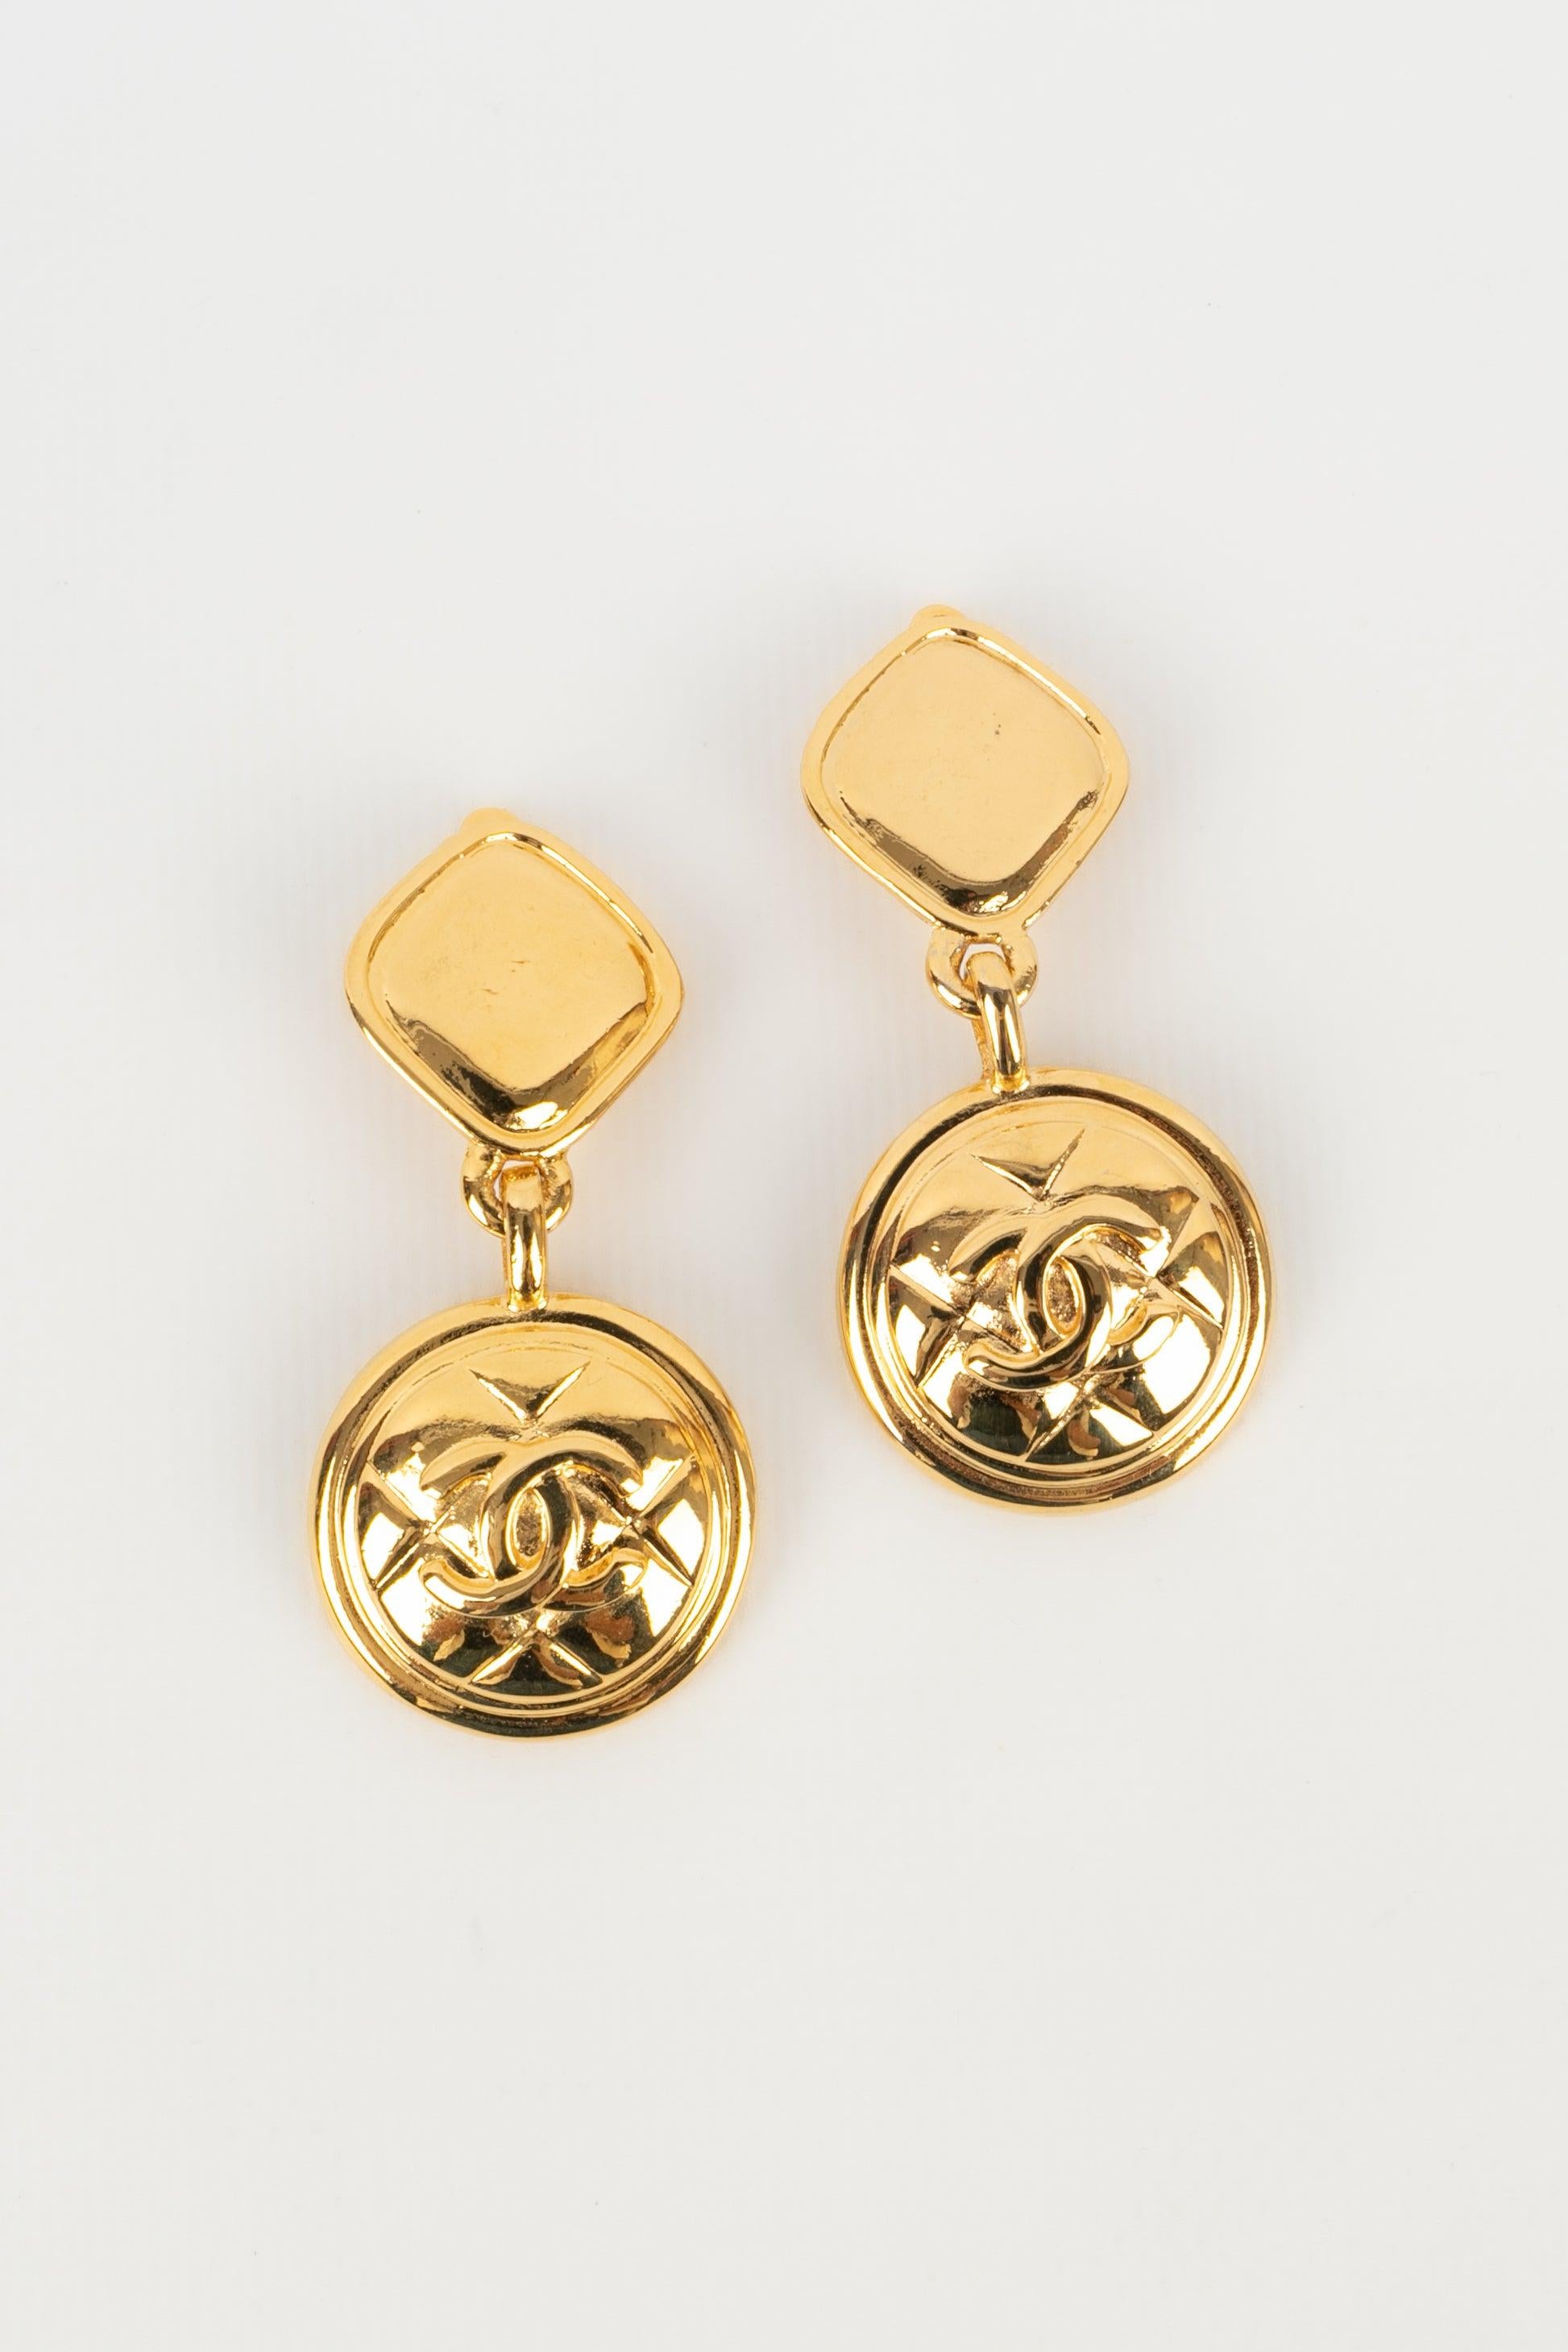 Chanel - (Made in France) Golden metal clip-on earrings. Piece from the end of the 1980s.

Additional information:
Condition: Very good condition
Dimensions: Length: 6.5 cm

Seller Reference: BOB124
